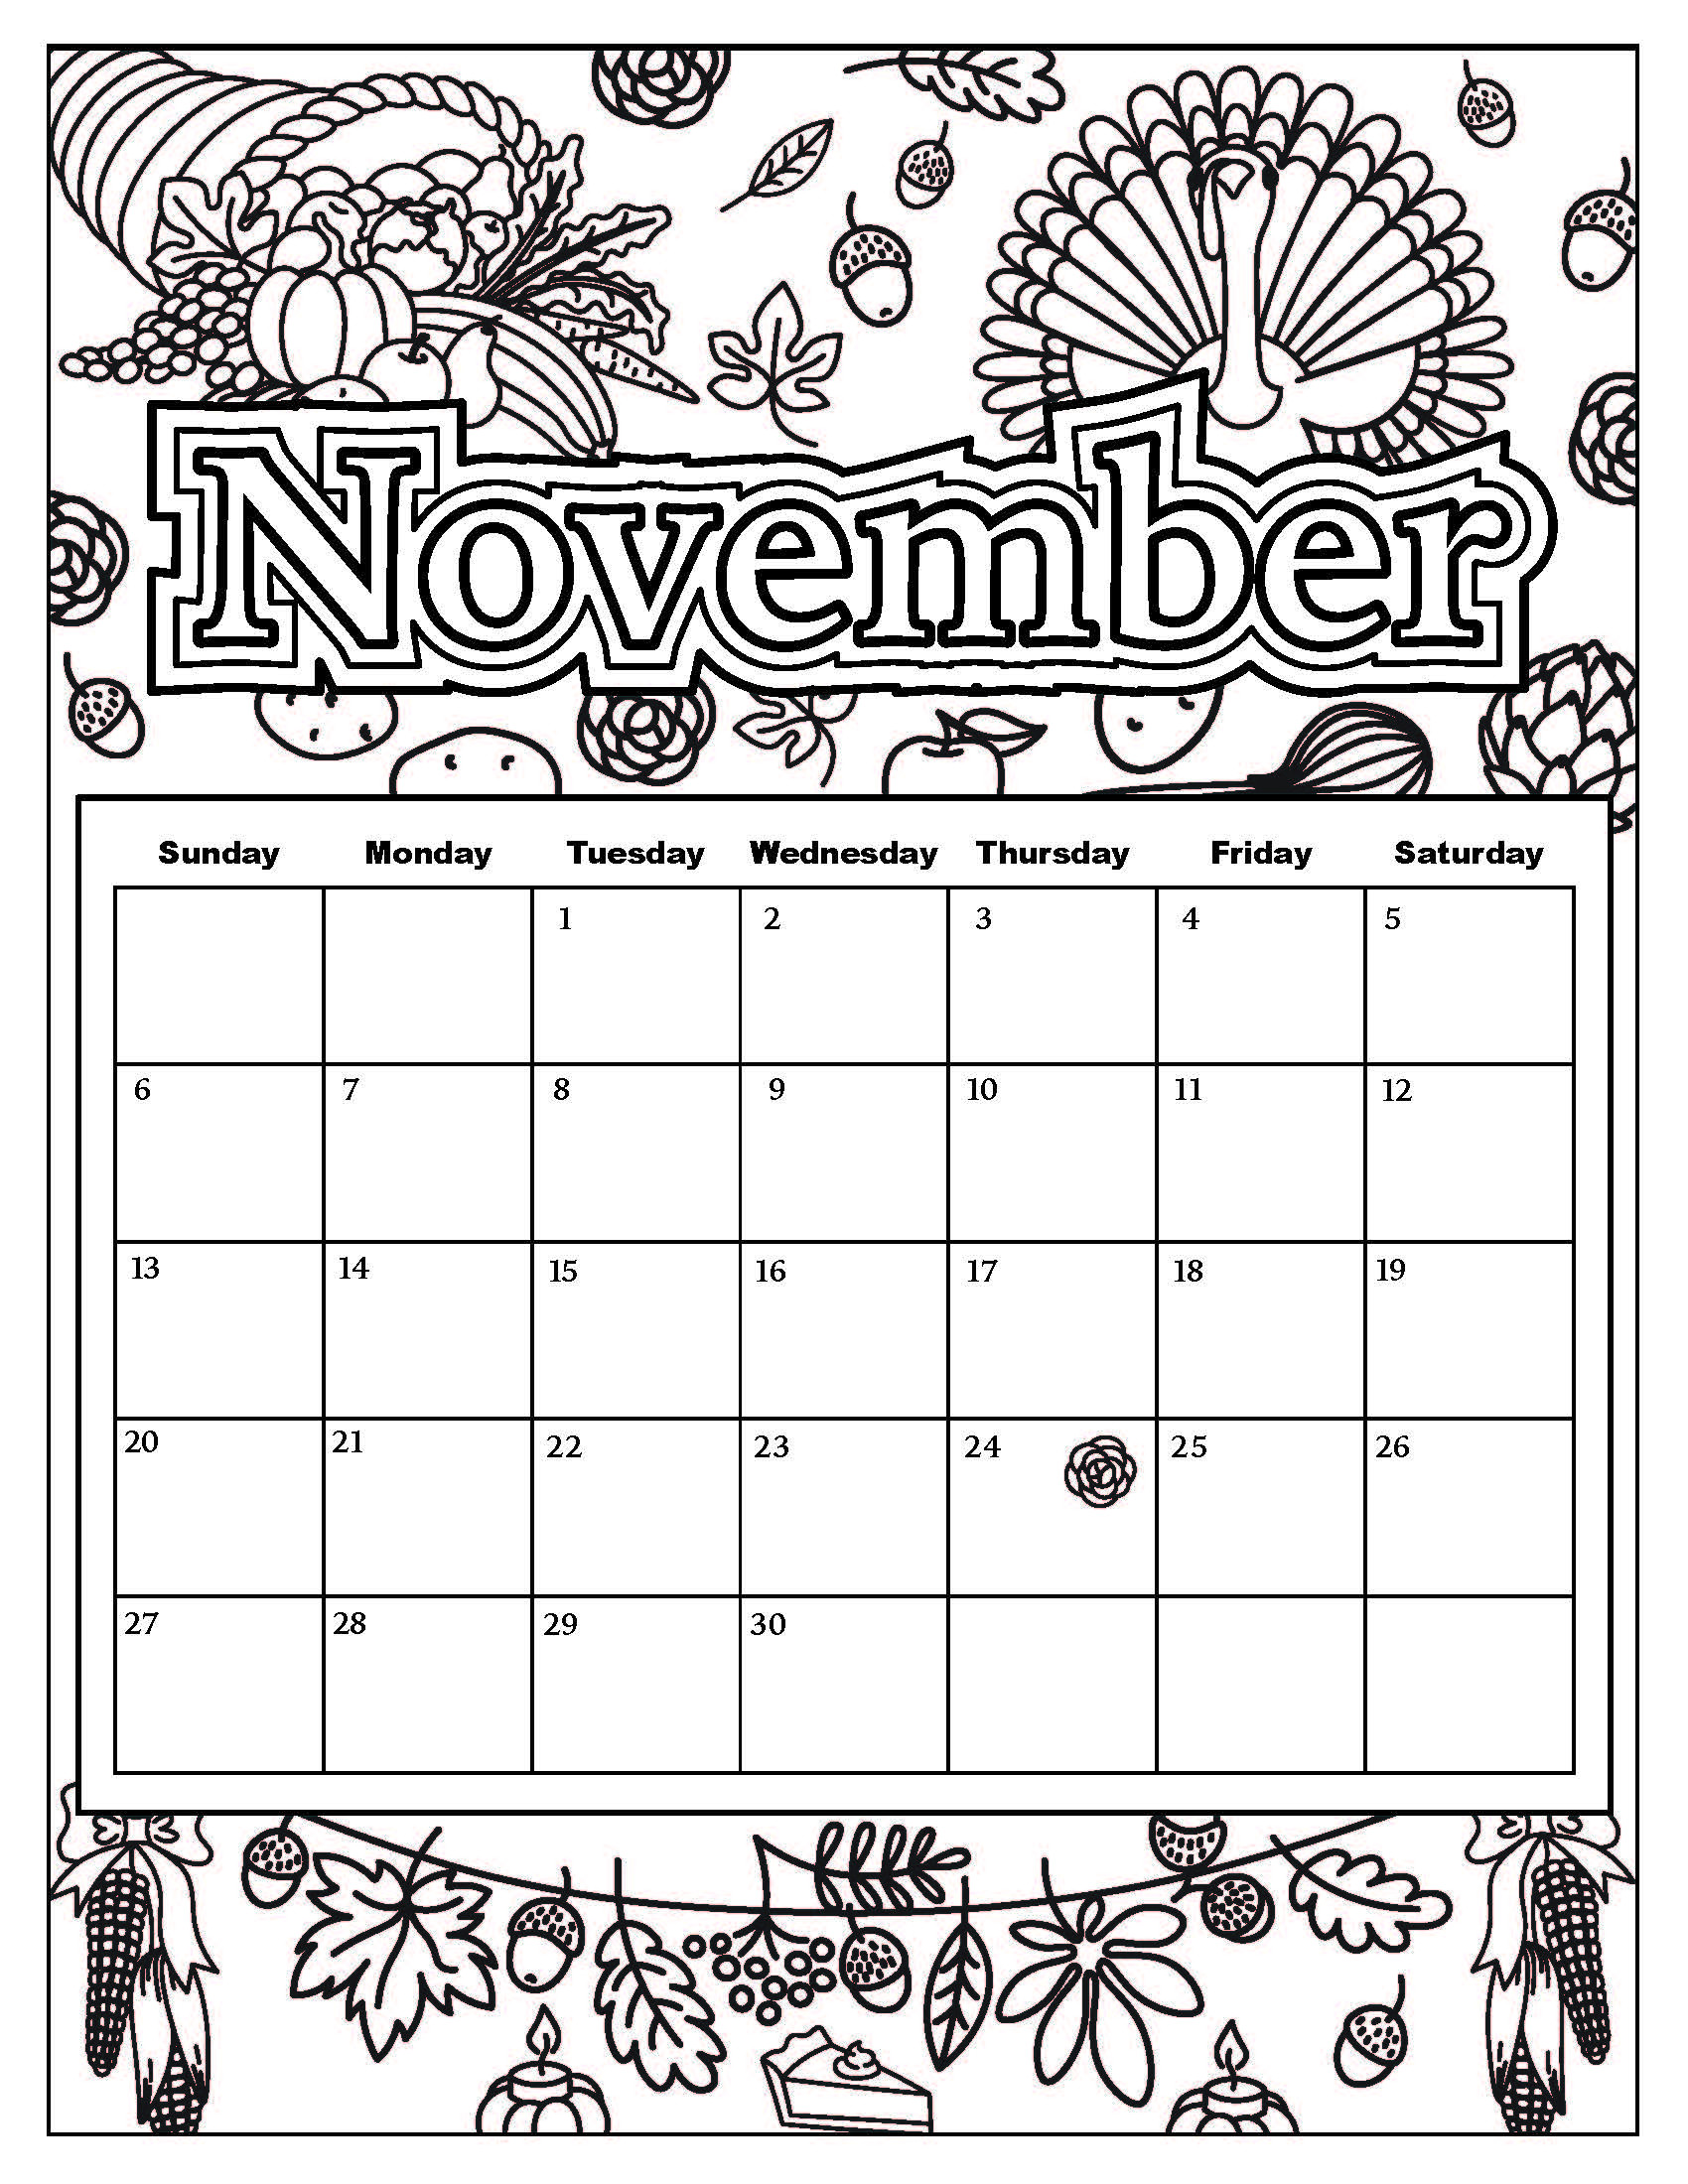 calendar-coloring-pages-at-getcolorings-free-printable-colorings-pages-to-print-and-color